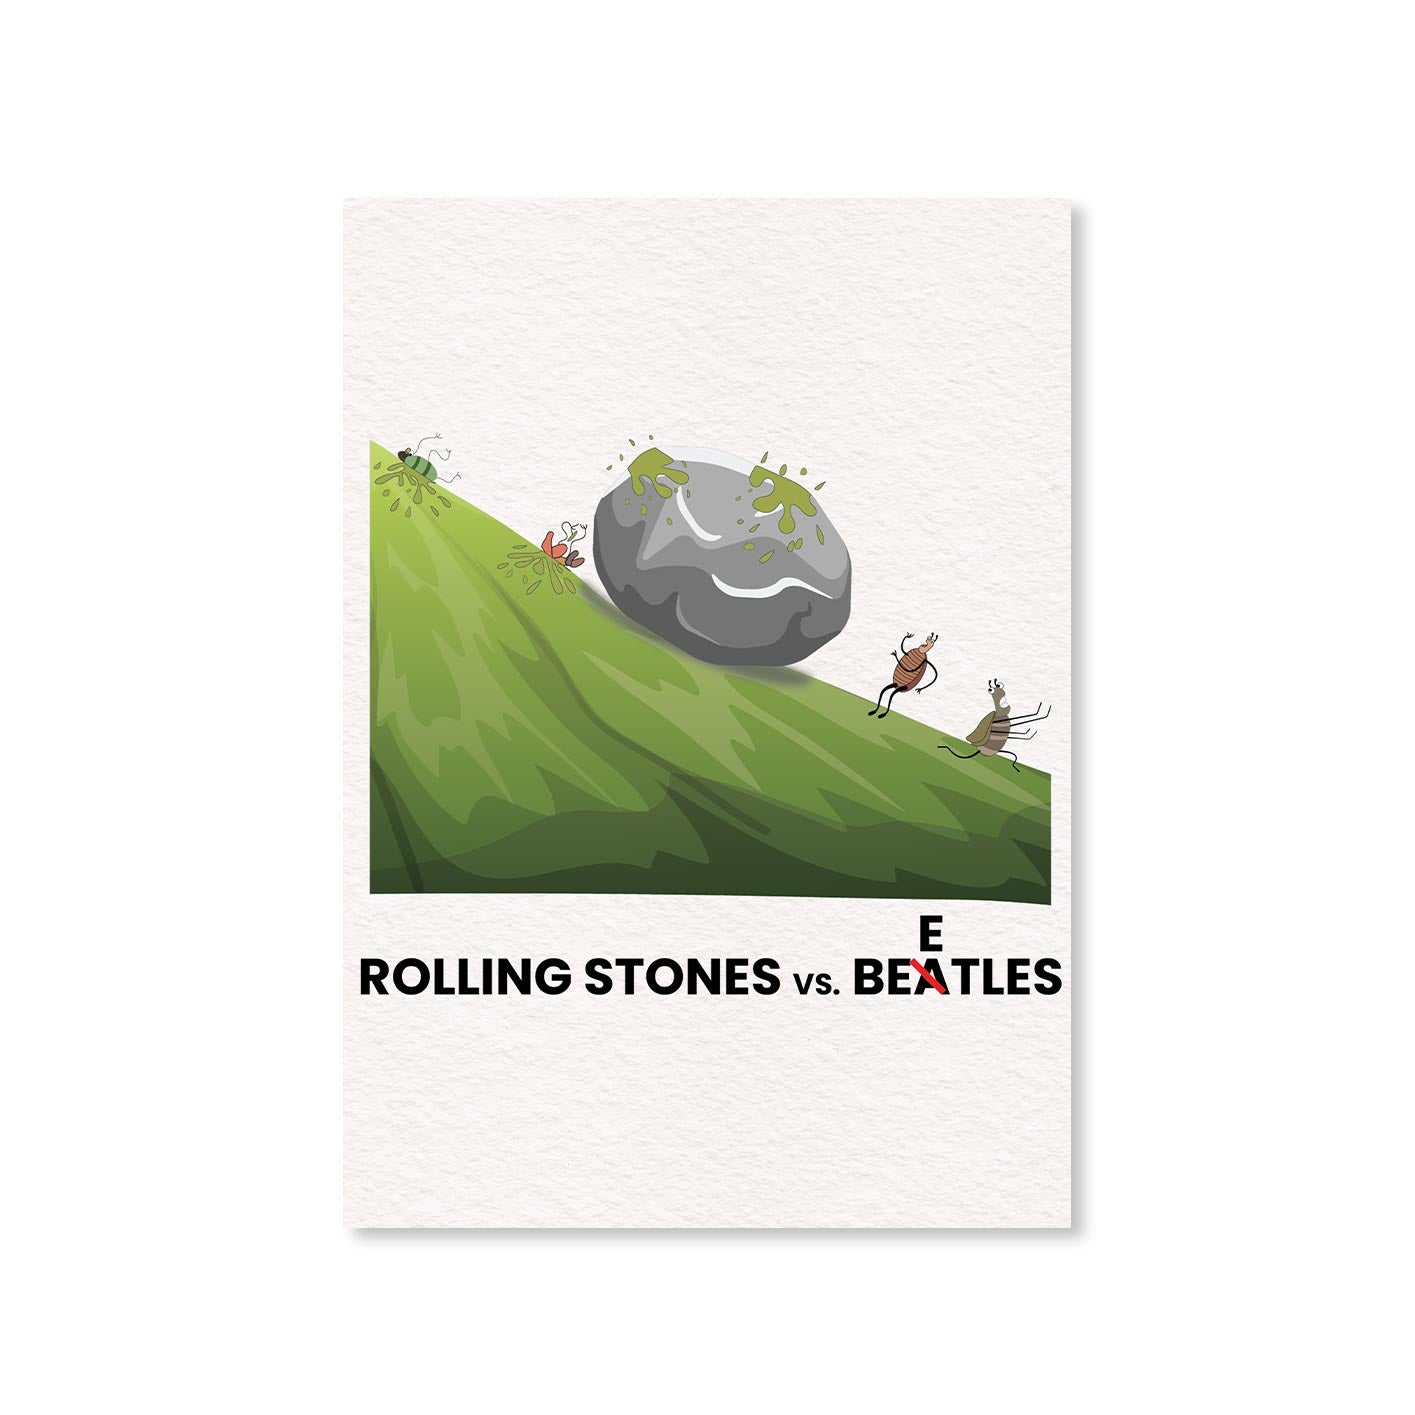 Stones vs. Beetles The Beatles Poster Posters The Banyan Tee TBT Wall Art unframed framed